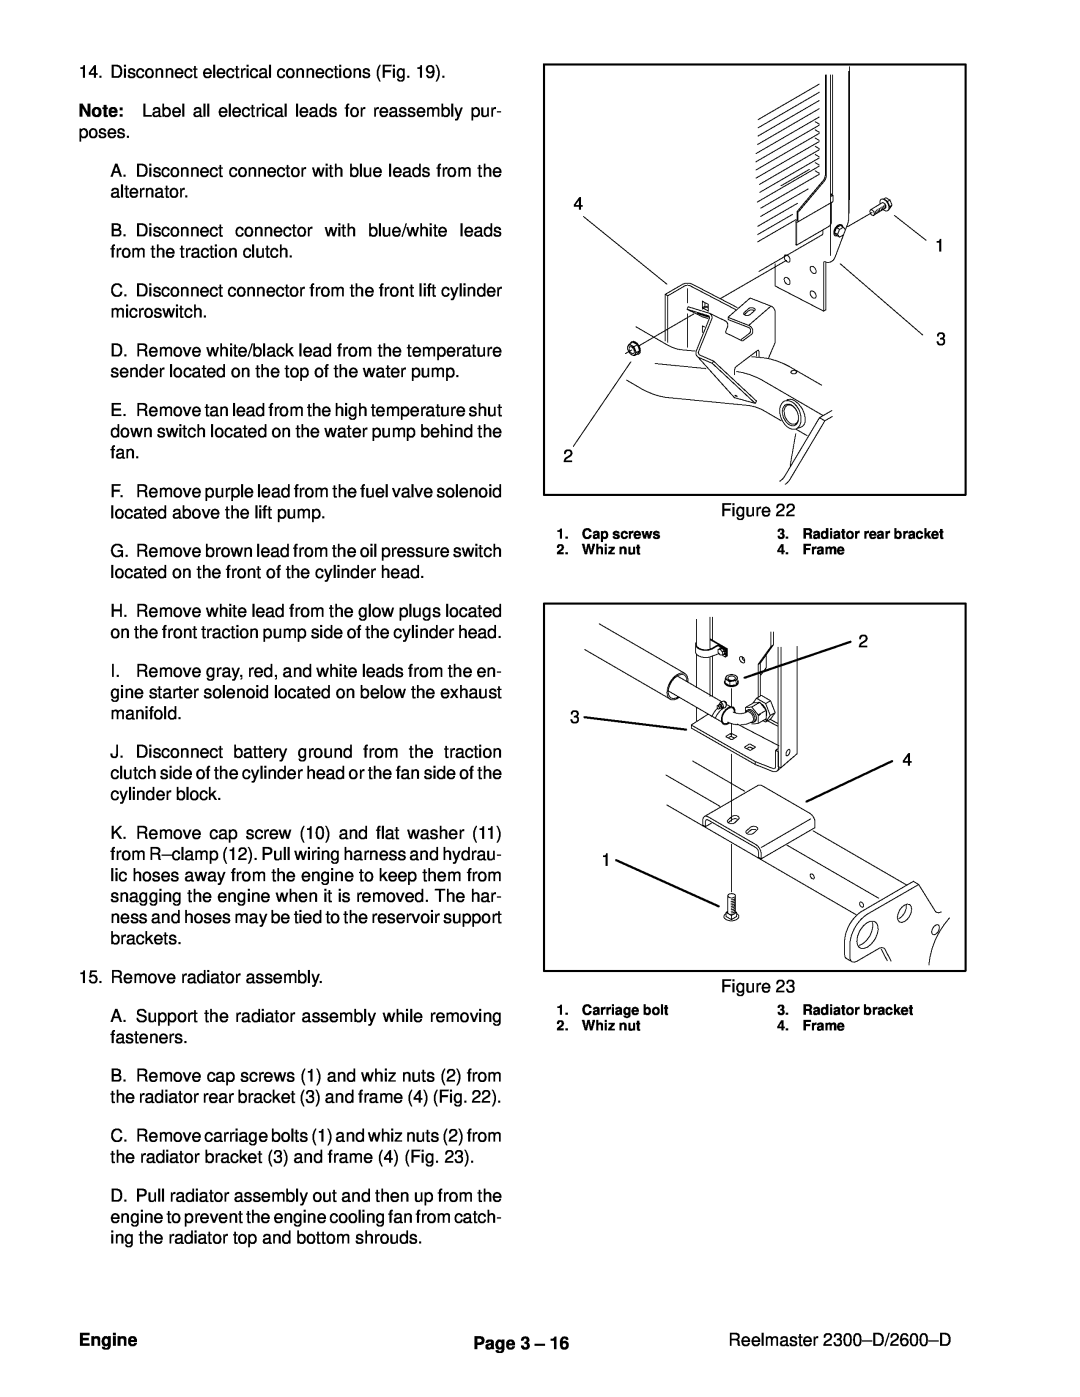 Toro 2300-D, 2600D service manual Disconnect electrical connections Fig, Engine, Page 3 ±, Reelmaster 2300±D/2600±D 